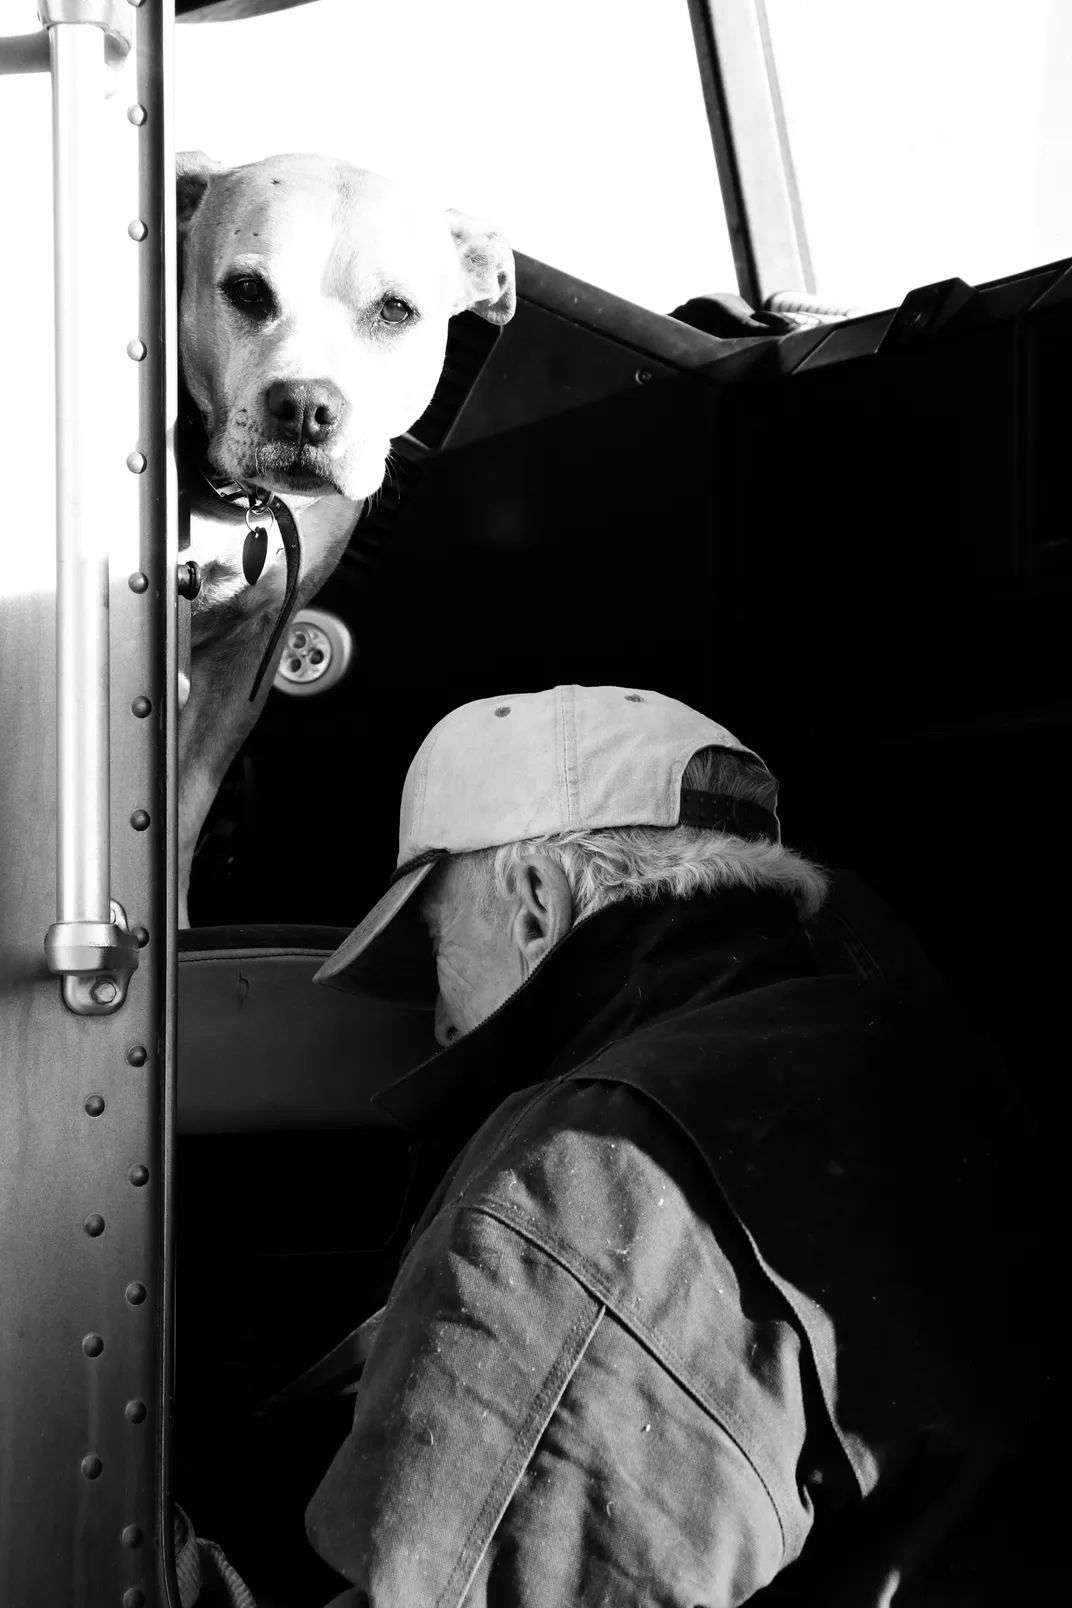 6 - It was “bring your pet to work” day for this truck driver, who stopped at a gas station along the highway to check on his pet after a night on the road.